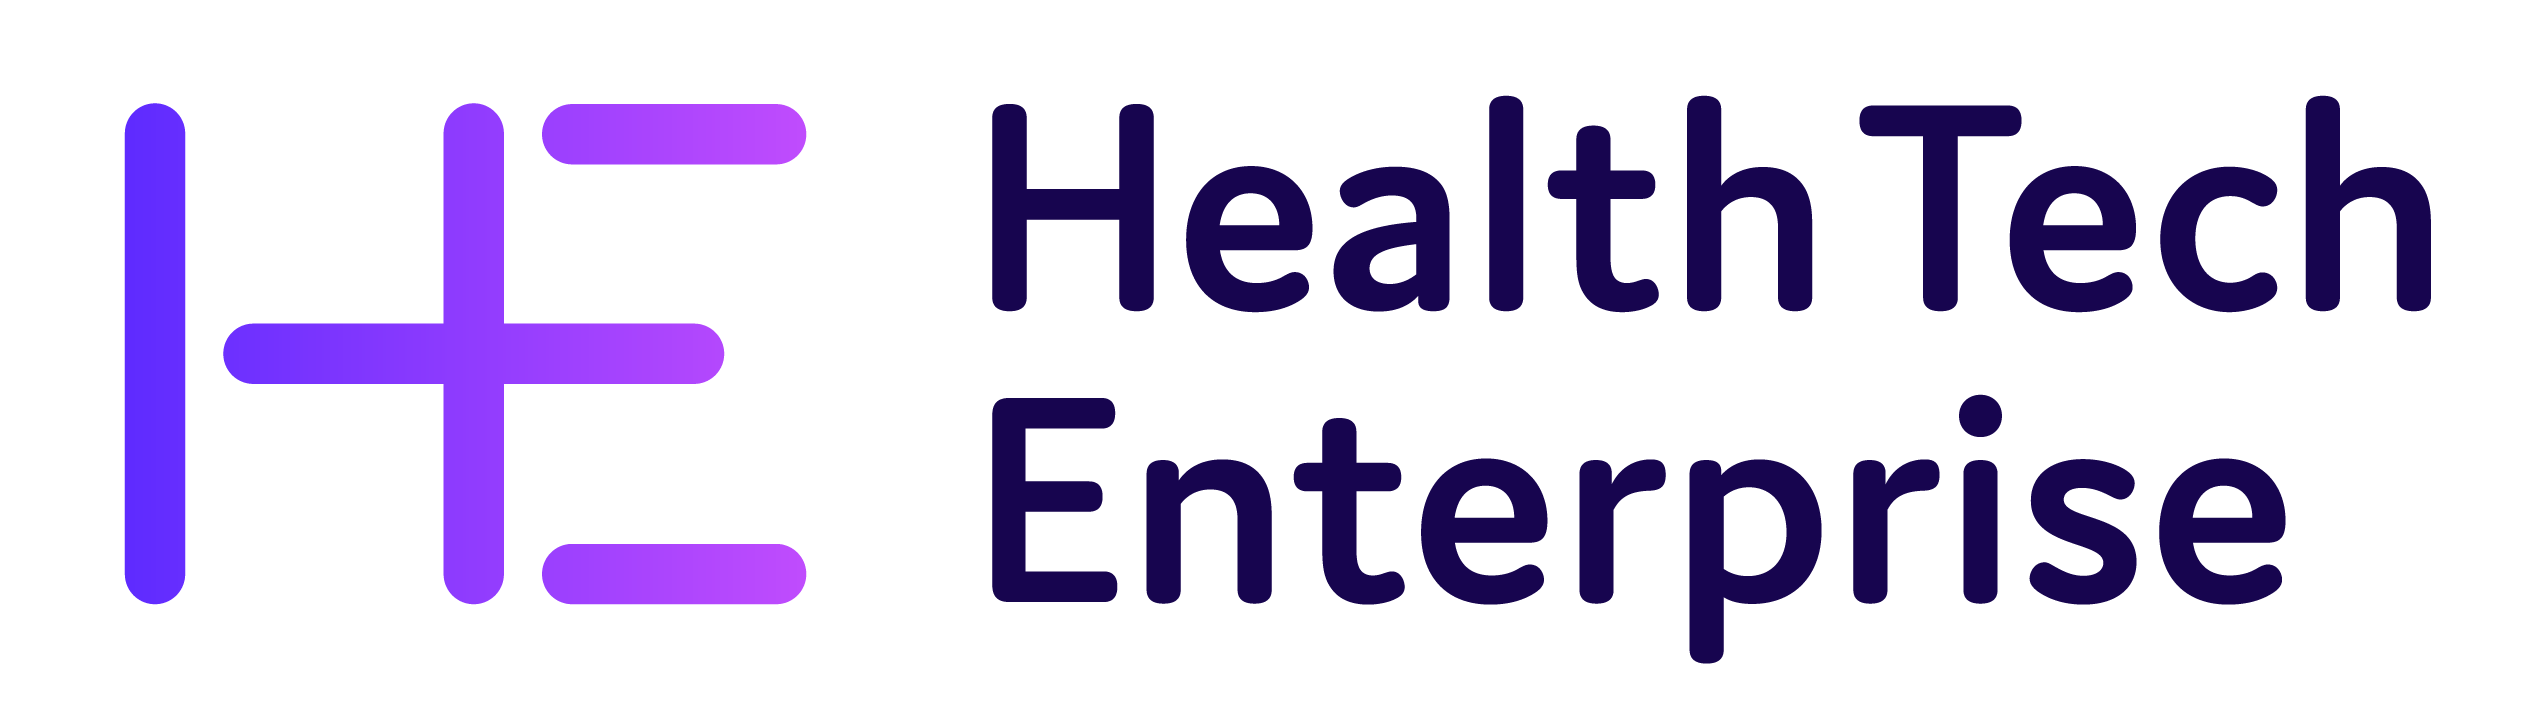 Health Tech Enterprise and Future Perfect (Healthcare) Combine Forces to Expand the Support Available to Clinical Innovators Developing AI Tools and Digital Health Solutions.